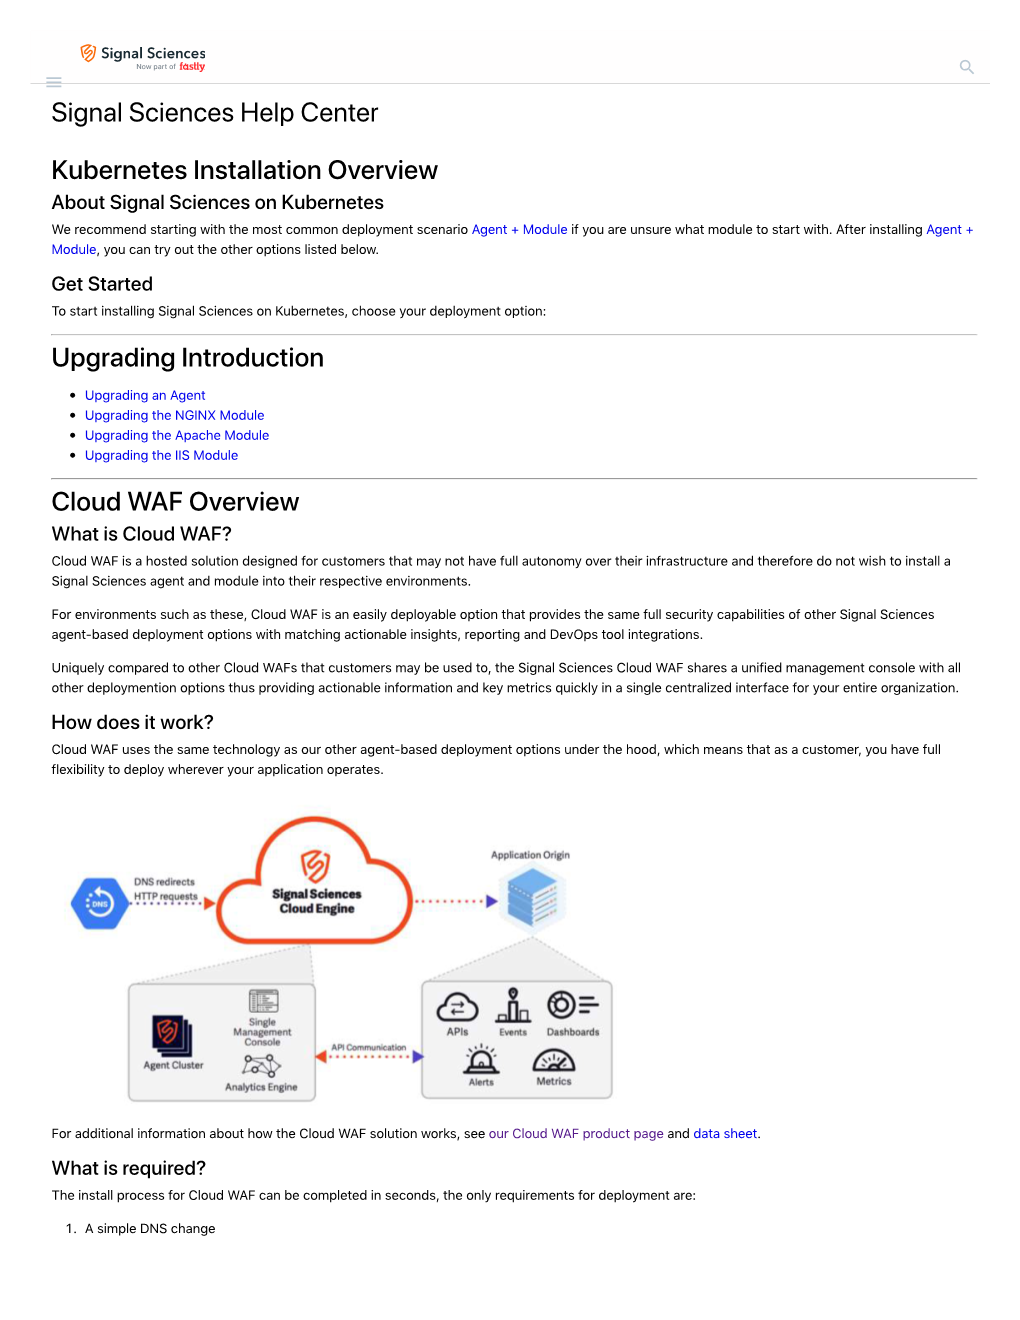 Signal Sciences Help Center Kubernetes Installation Overview